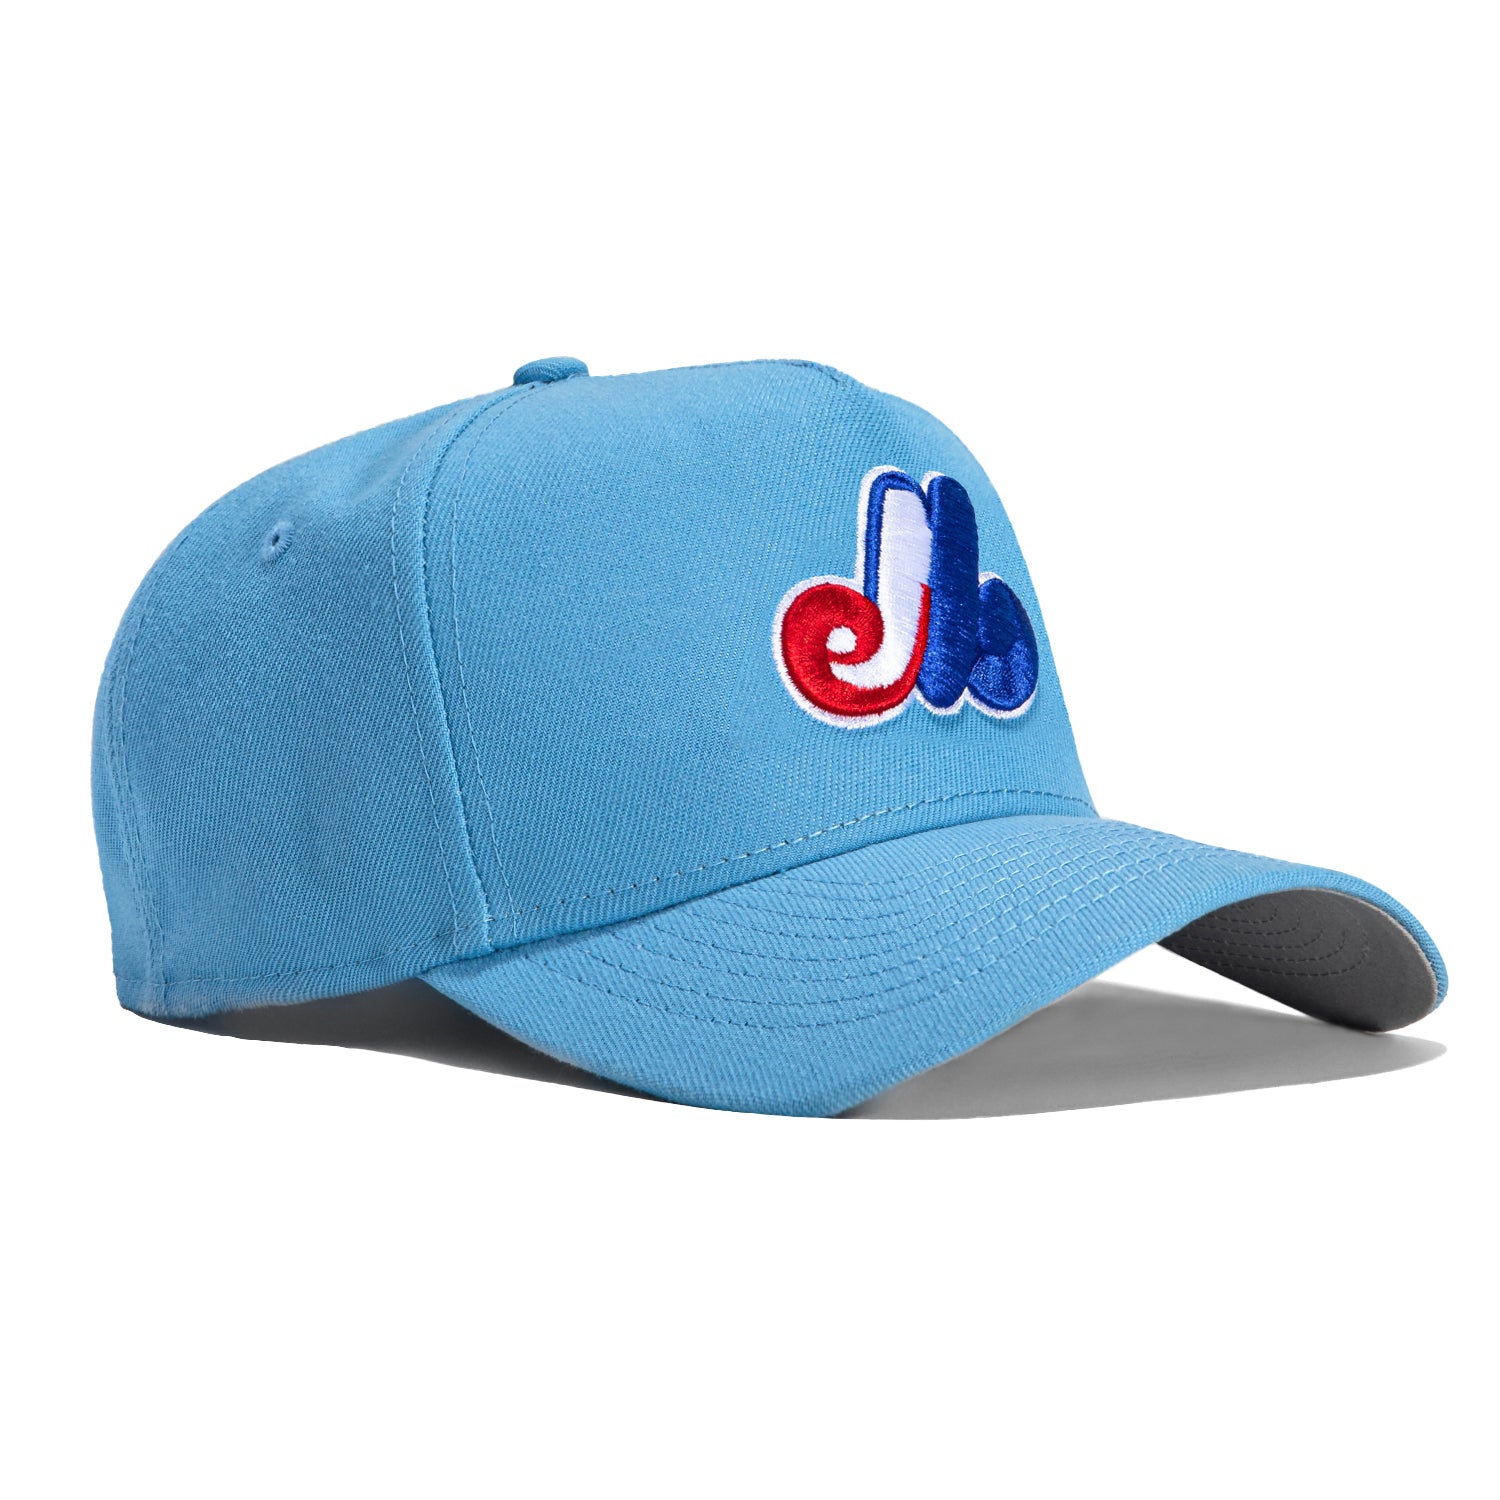 New Era 9FORTY A-Frame Montreal Expos Snapback Hat - Light Blue